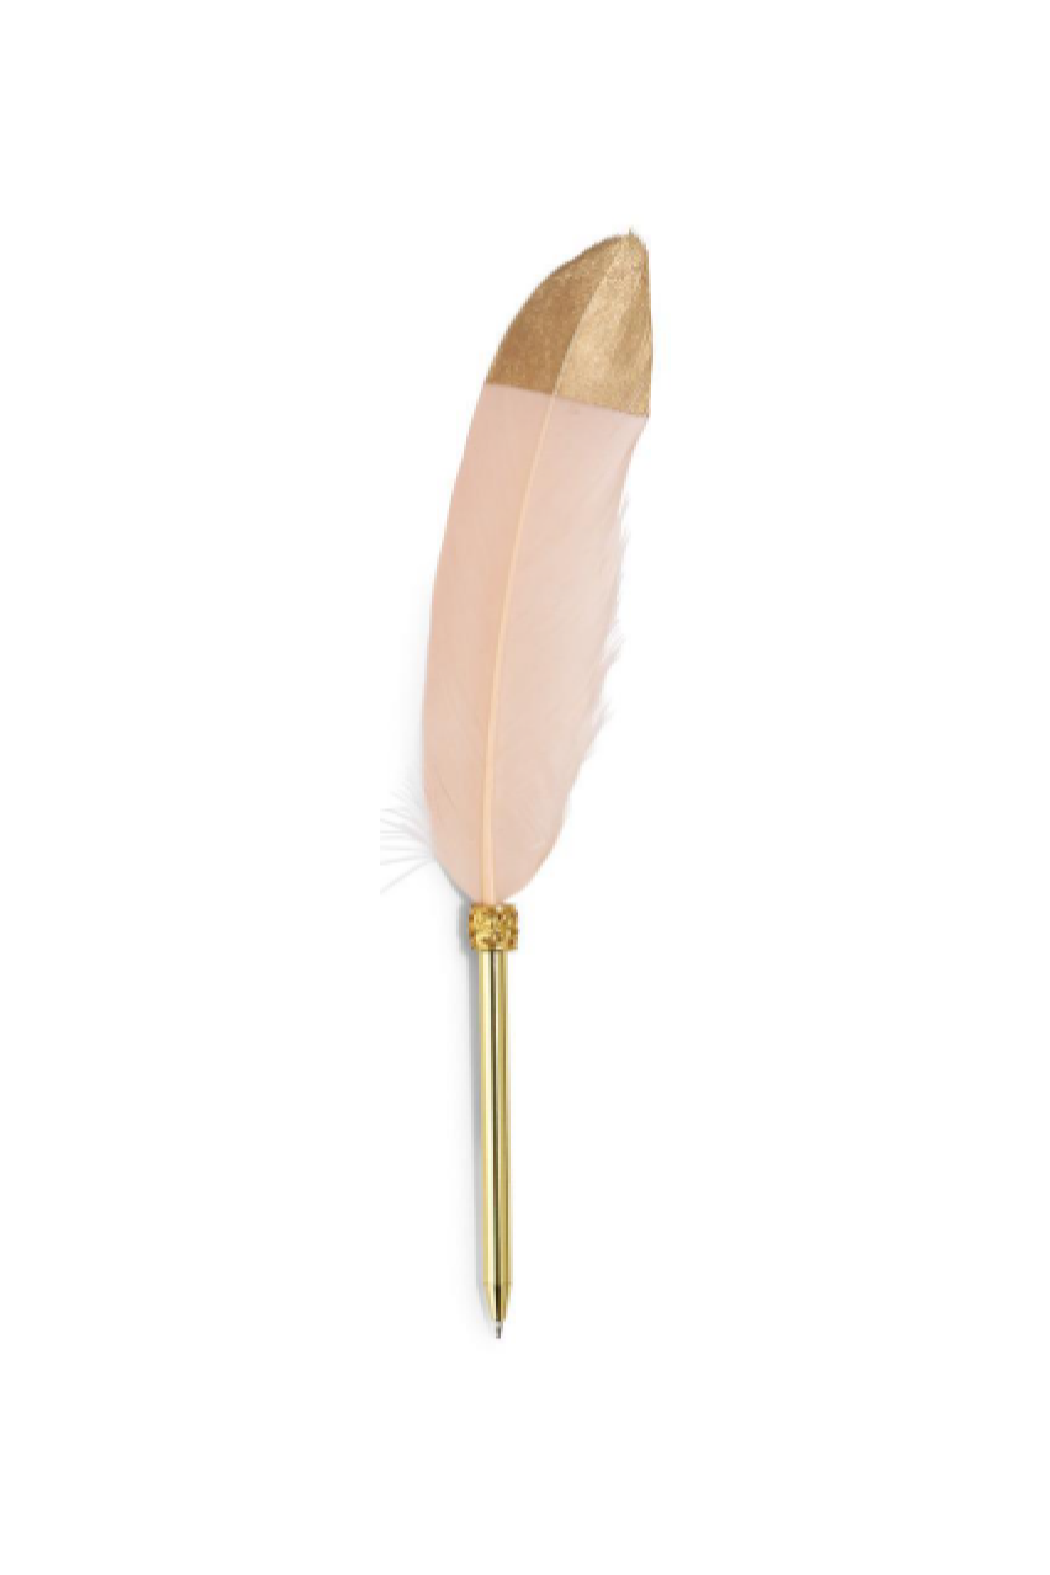 Goose Quill Ballpoint Feather Pen : Buy Online from